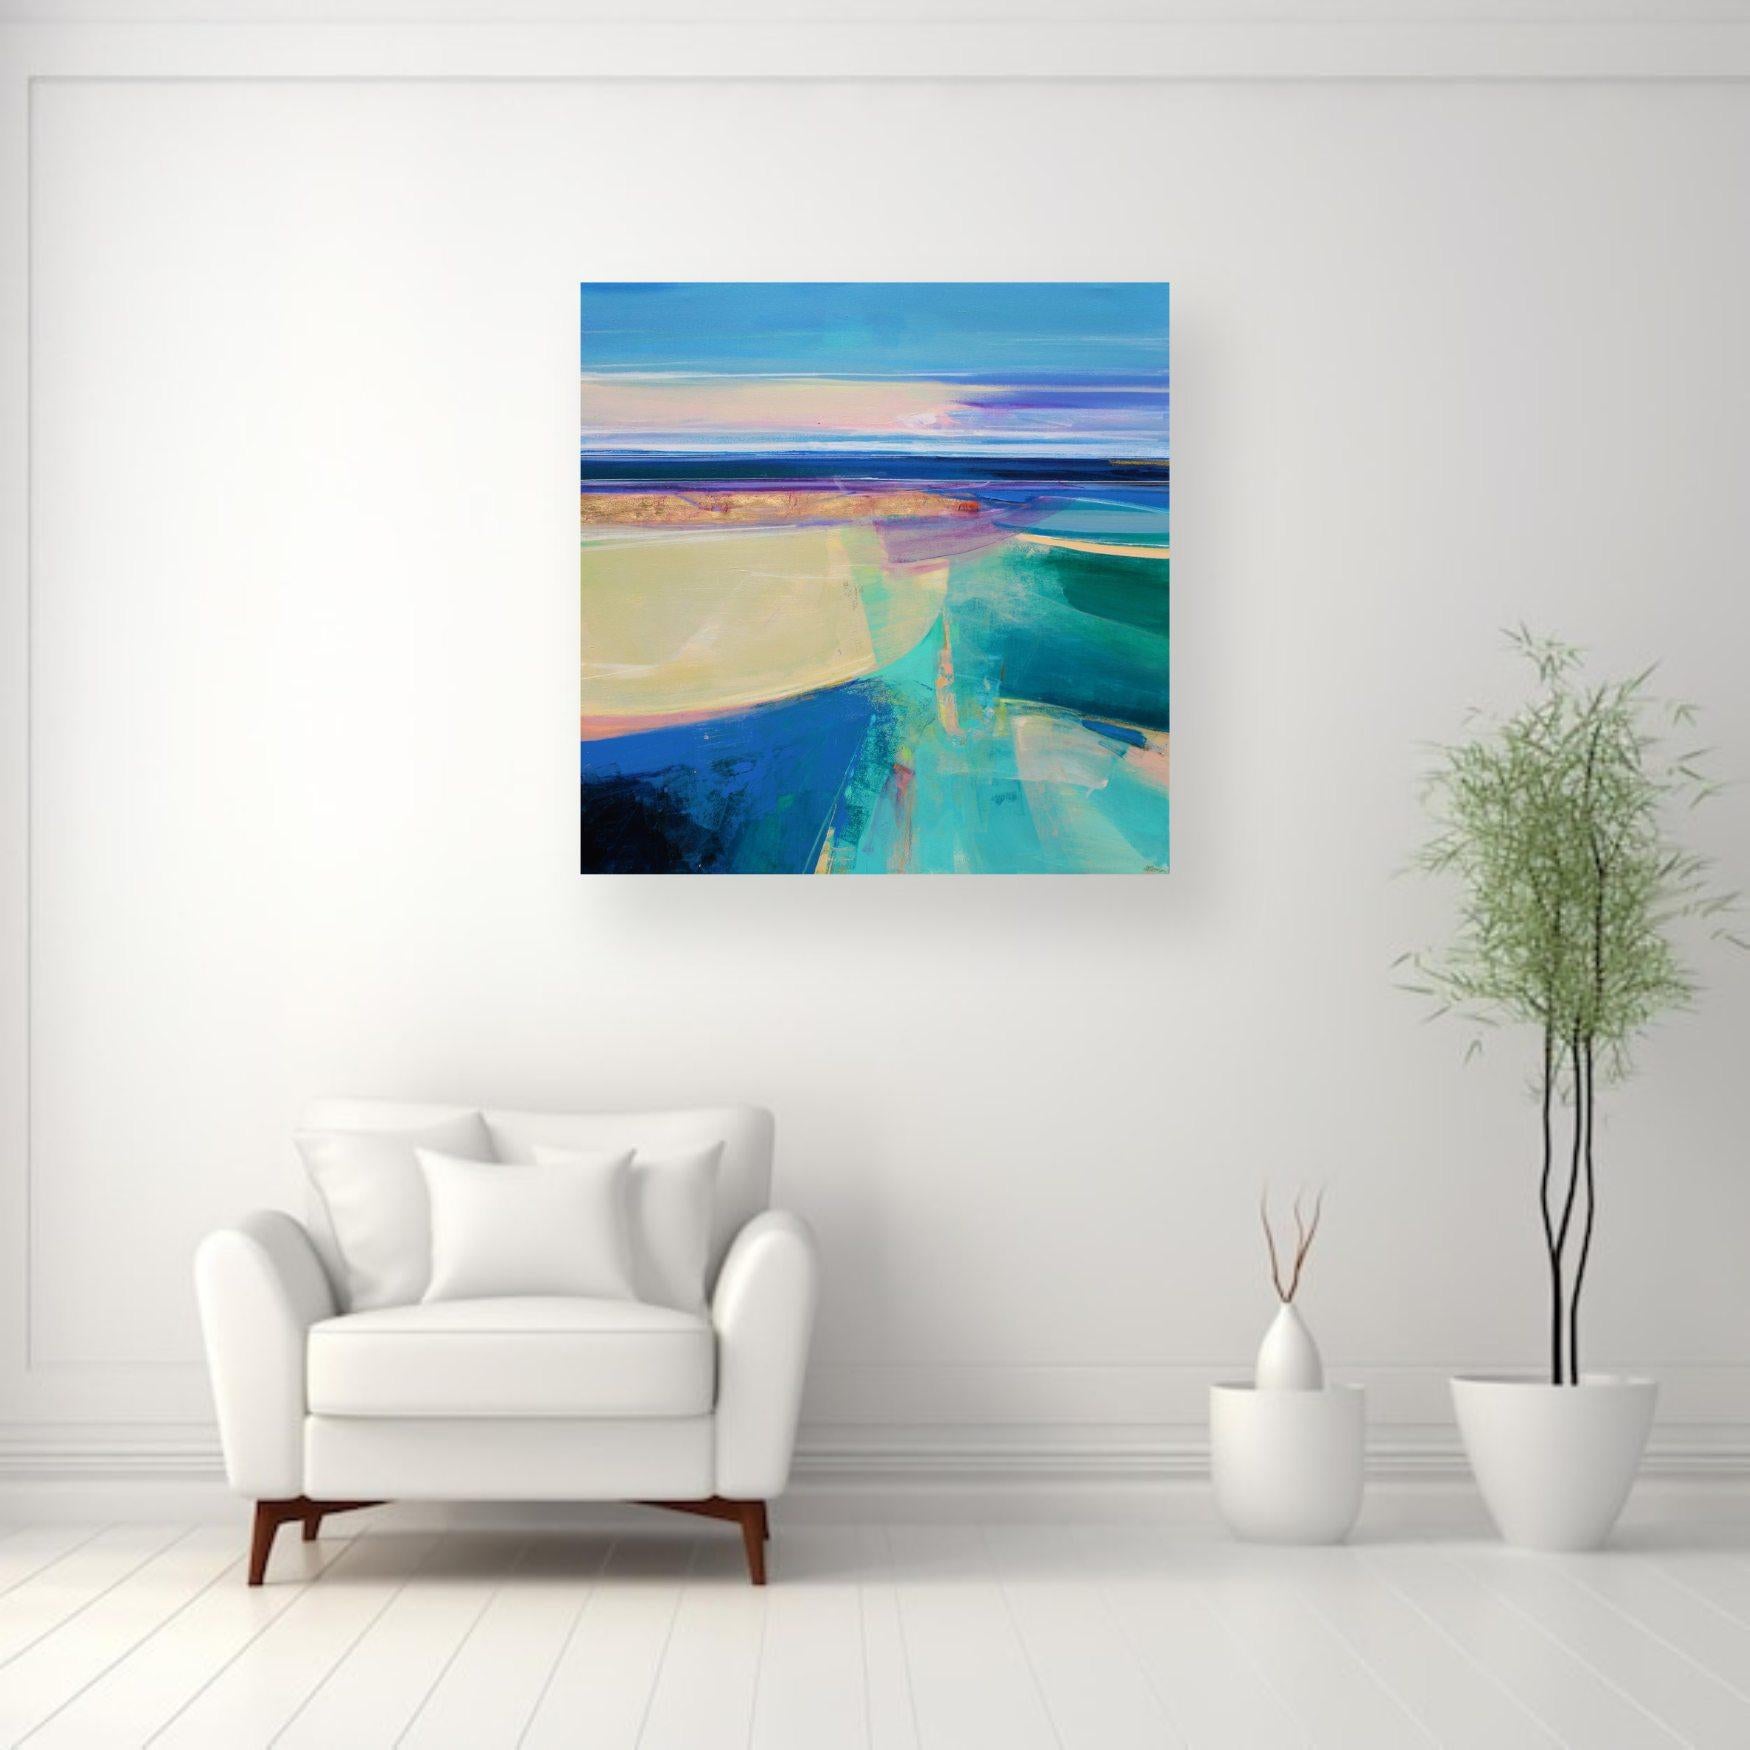 Revealing the Tide 2-original abstract floral landscape oil painting- modern art - Painting by Magdalena Morey